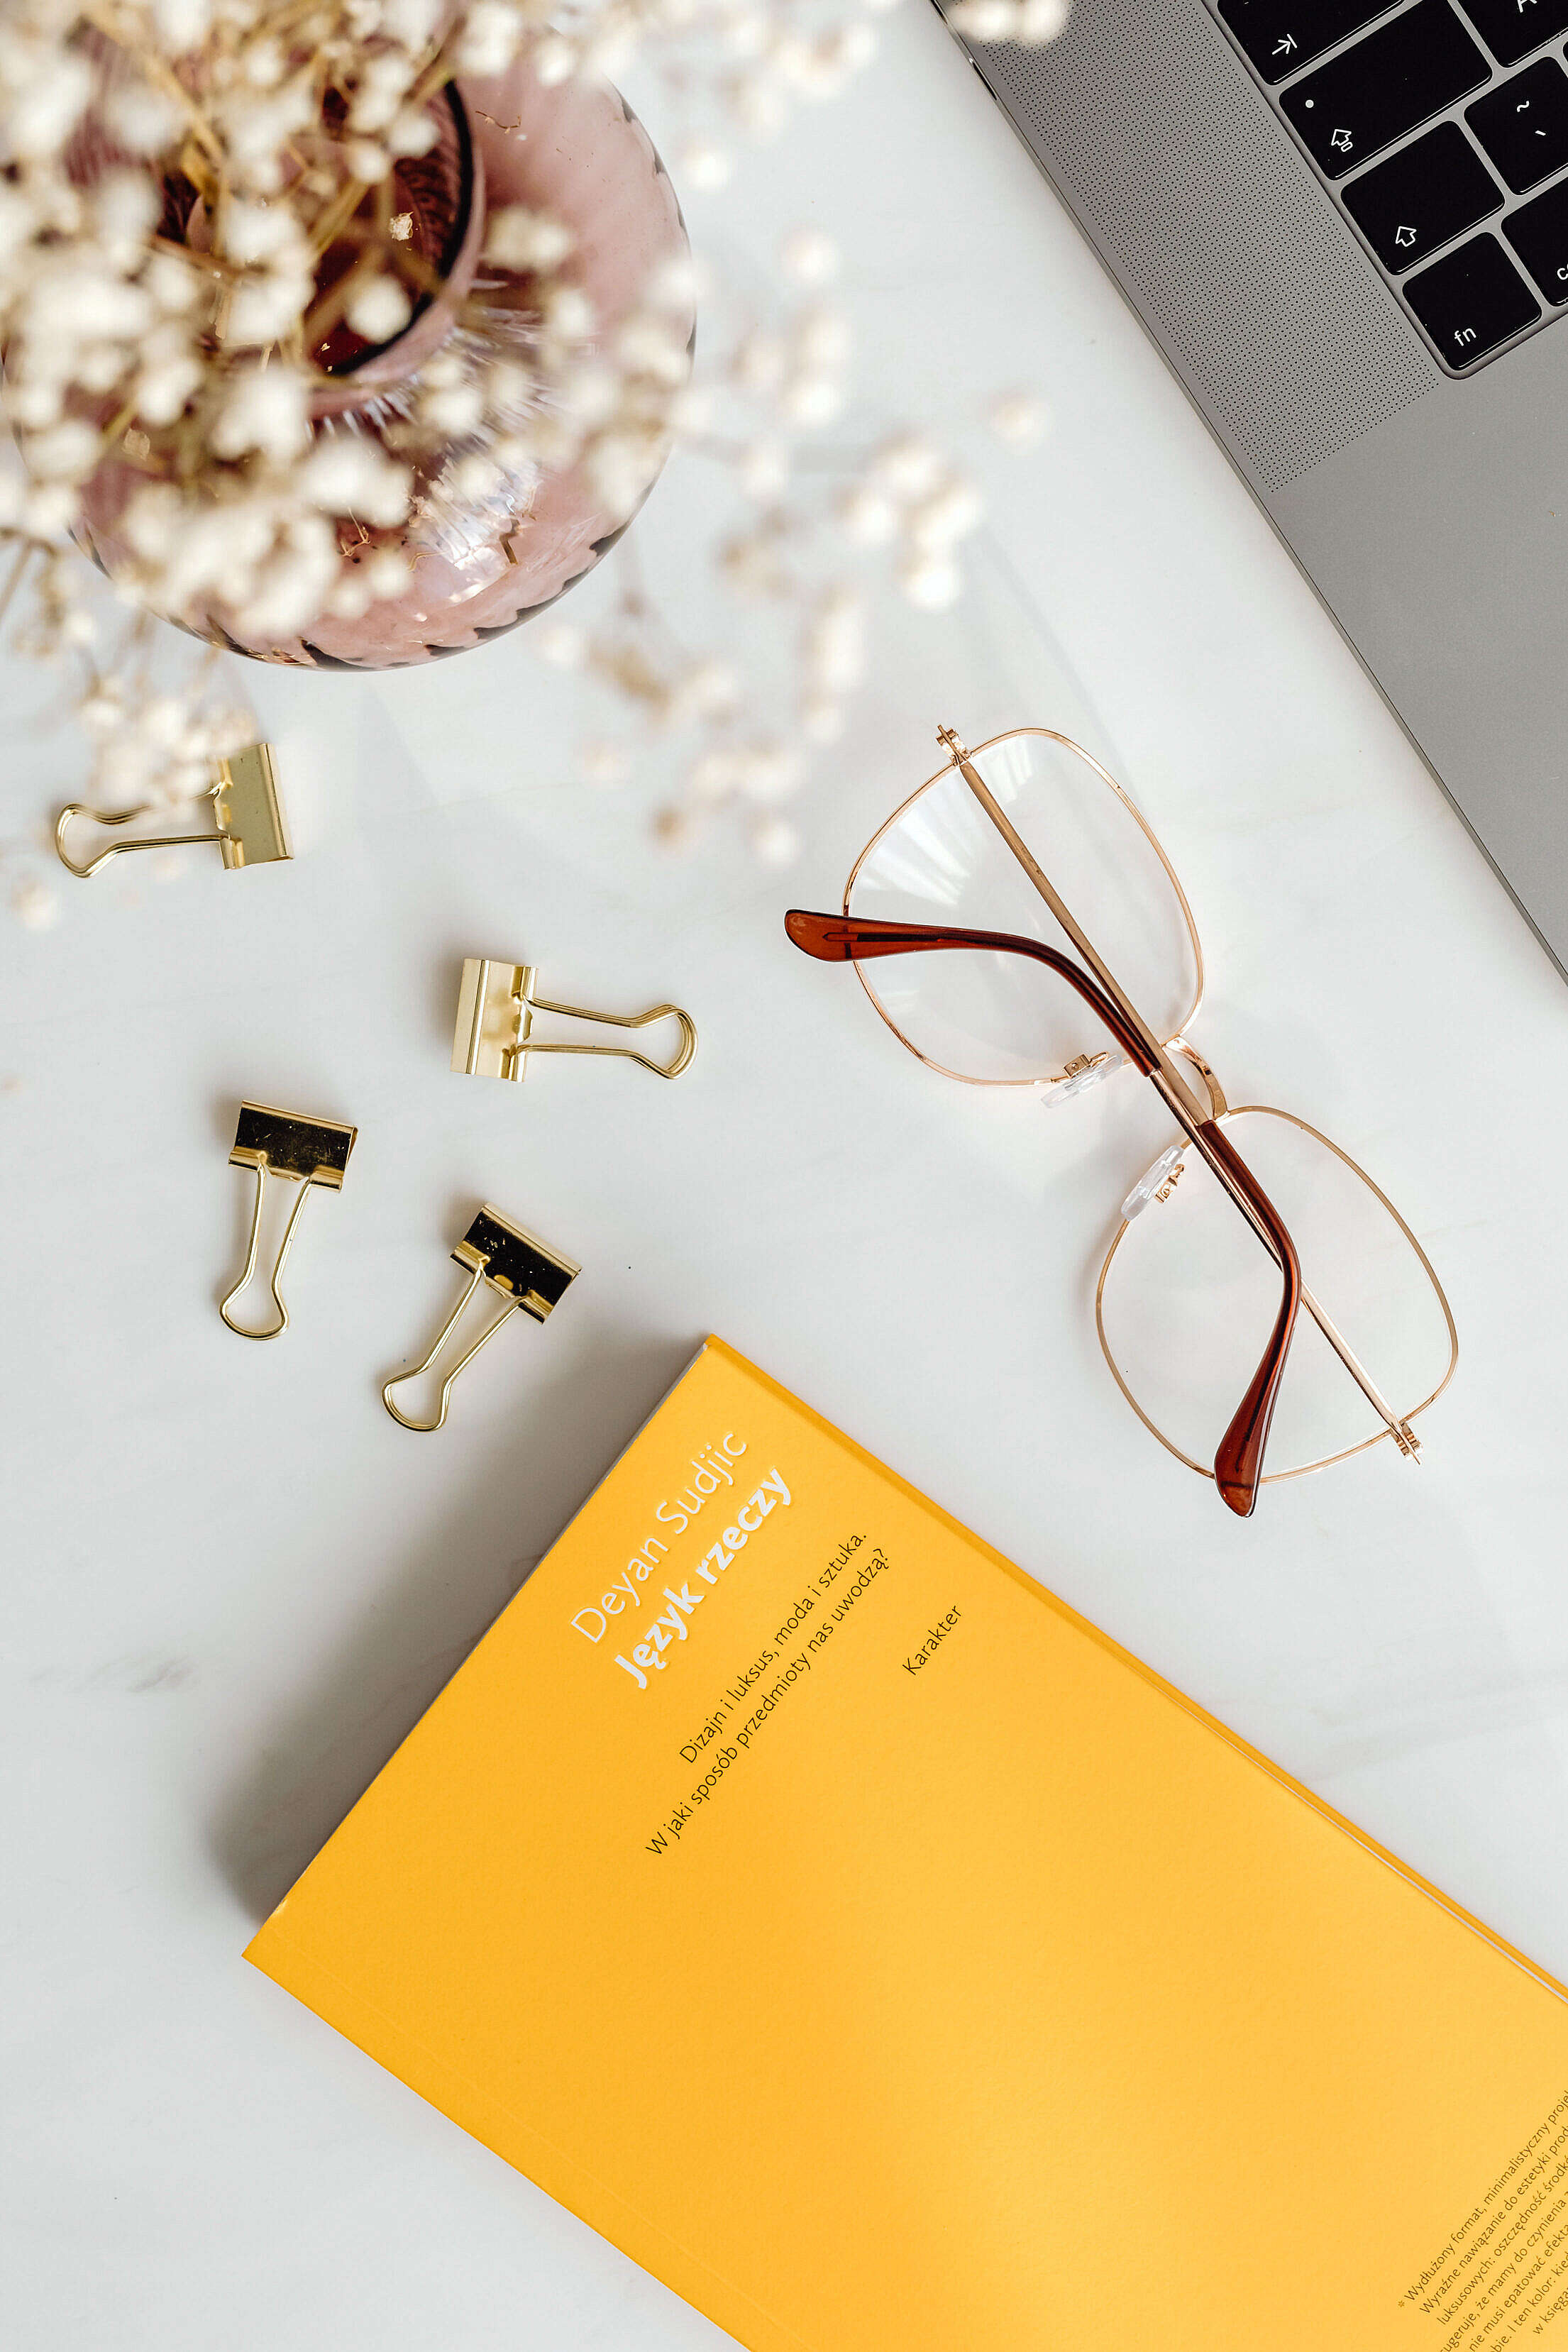 Creative Flatlay Design Book and Eyeglasses on the Table Free Stock Photo